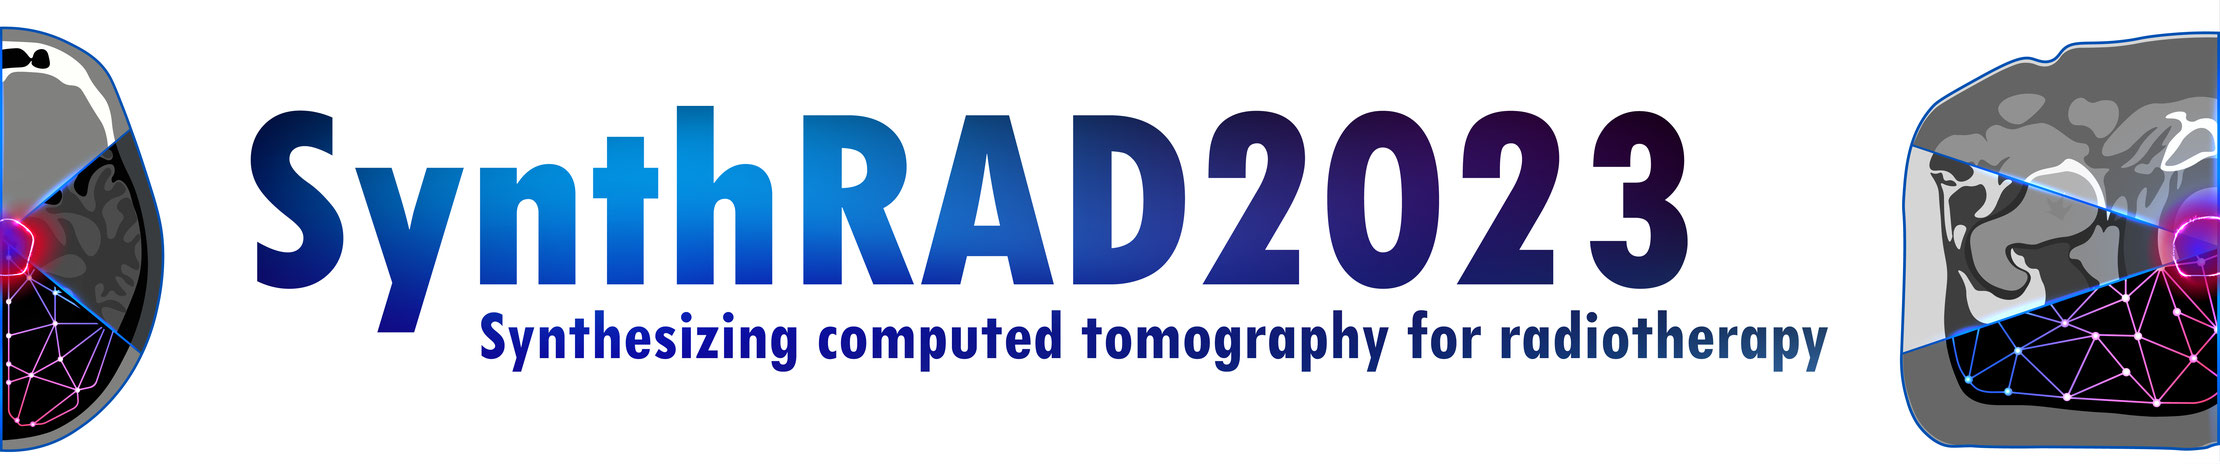 SynthRAD2023 Banner